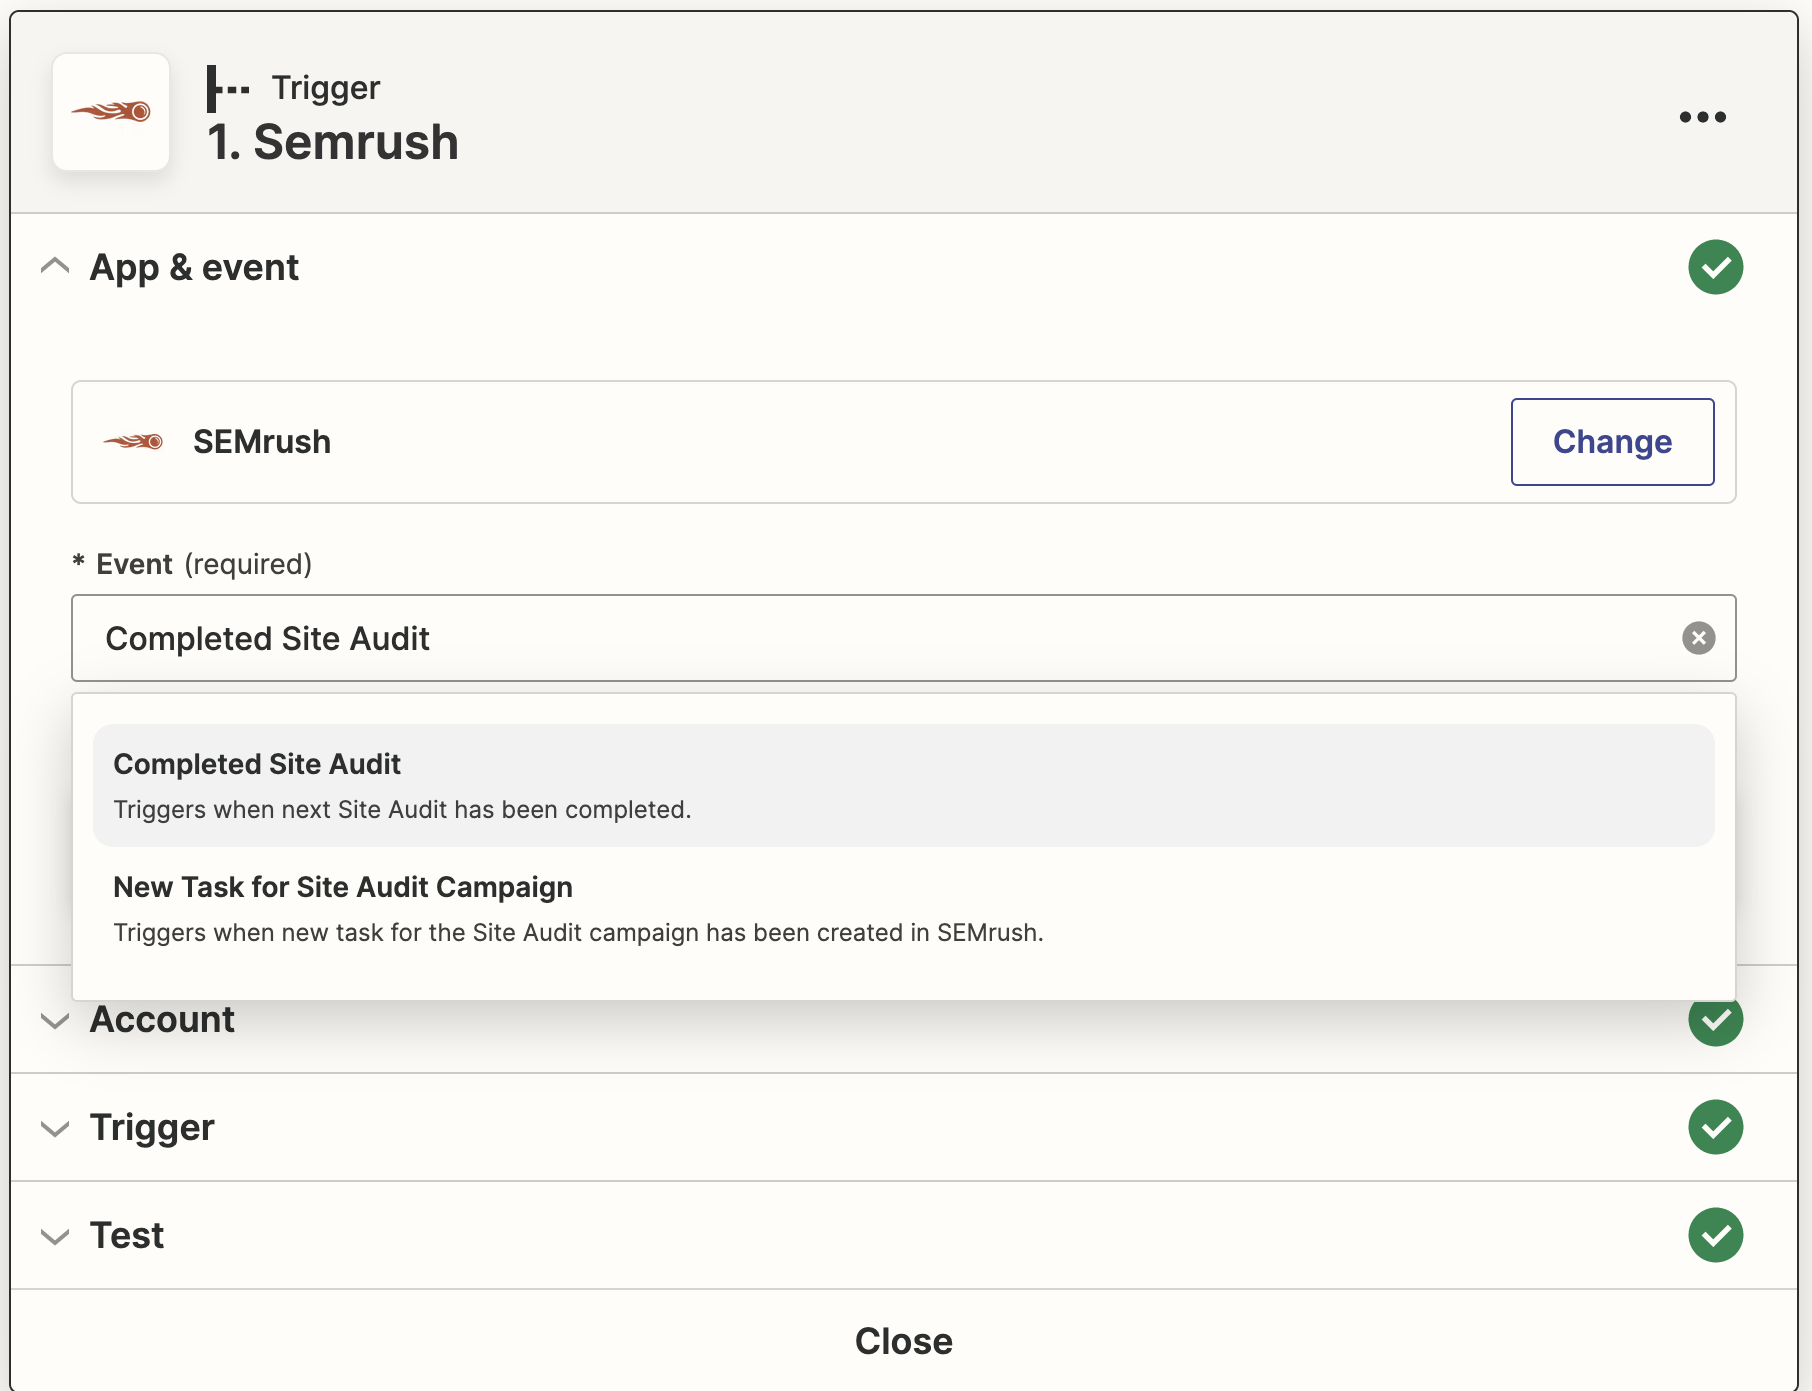 Screenshot from Zapier showing events "Completed Site Audit" and "New Task for Site Audit Campaign"